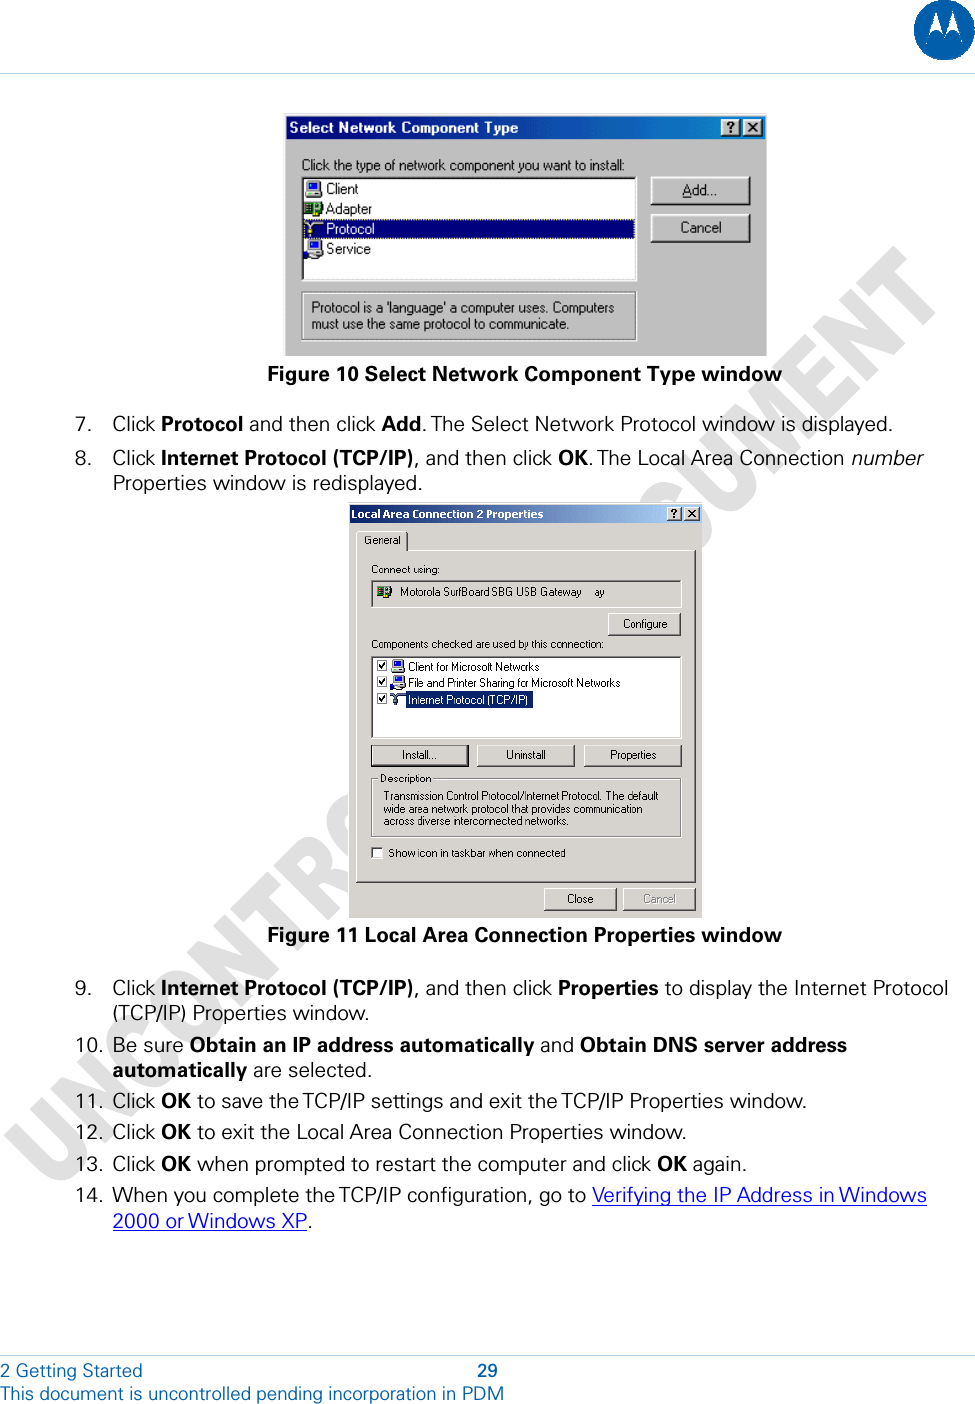   Figure 10 Select Network Component Type window 7. Click Protocol and then click Add. The Select Network Protocol window is displayed. 8. Click Internet Protocol (TCP/IP), and then click OK. The  Local Area  Connection number Properties window is redisplayed.  Figure 11 Local Area Connection Properties window 9. Click Internet Protocol (TCP/IP), and then click Properties to display the Internet Protocol (TCP/IP) Properties window. 10. Be sure Obtain an IP address automatically and Obtain DNS server address automatically are selected. 11. Click OK to save the TCP/IP settings and exit the TCP/IP Properties window. 12. Click OK to exit the Local Area Connection Properties window. 13. Click OK when prompted to restart the computer and click OK again. 14. When you complete the TCP/IP configuration, go to Verifying the IP Address in Windows 2000 or Windows XP. 2 Getting Started  29 This document is uncontrolled pending incorporation in PDM  